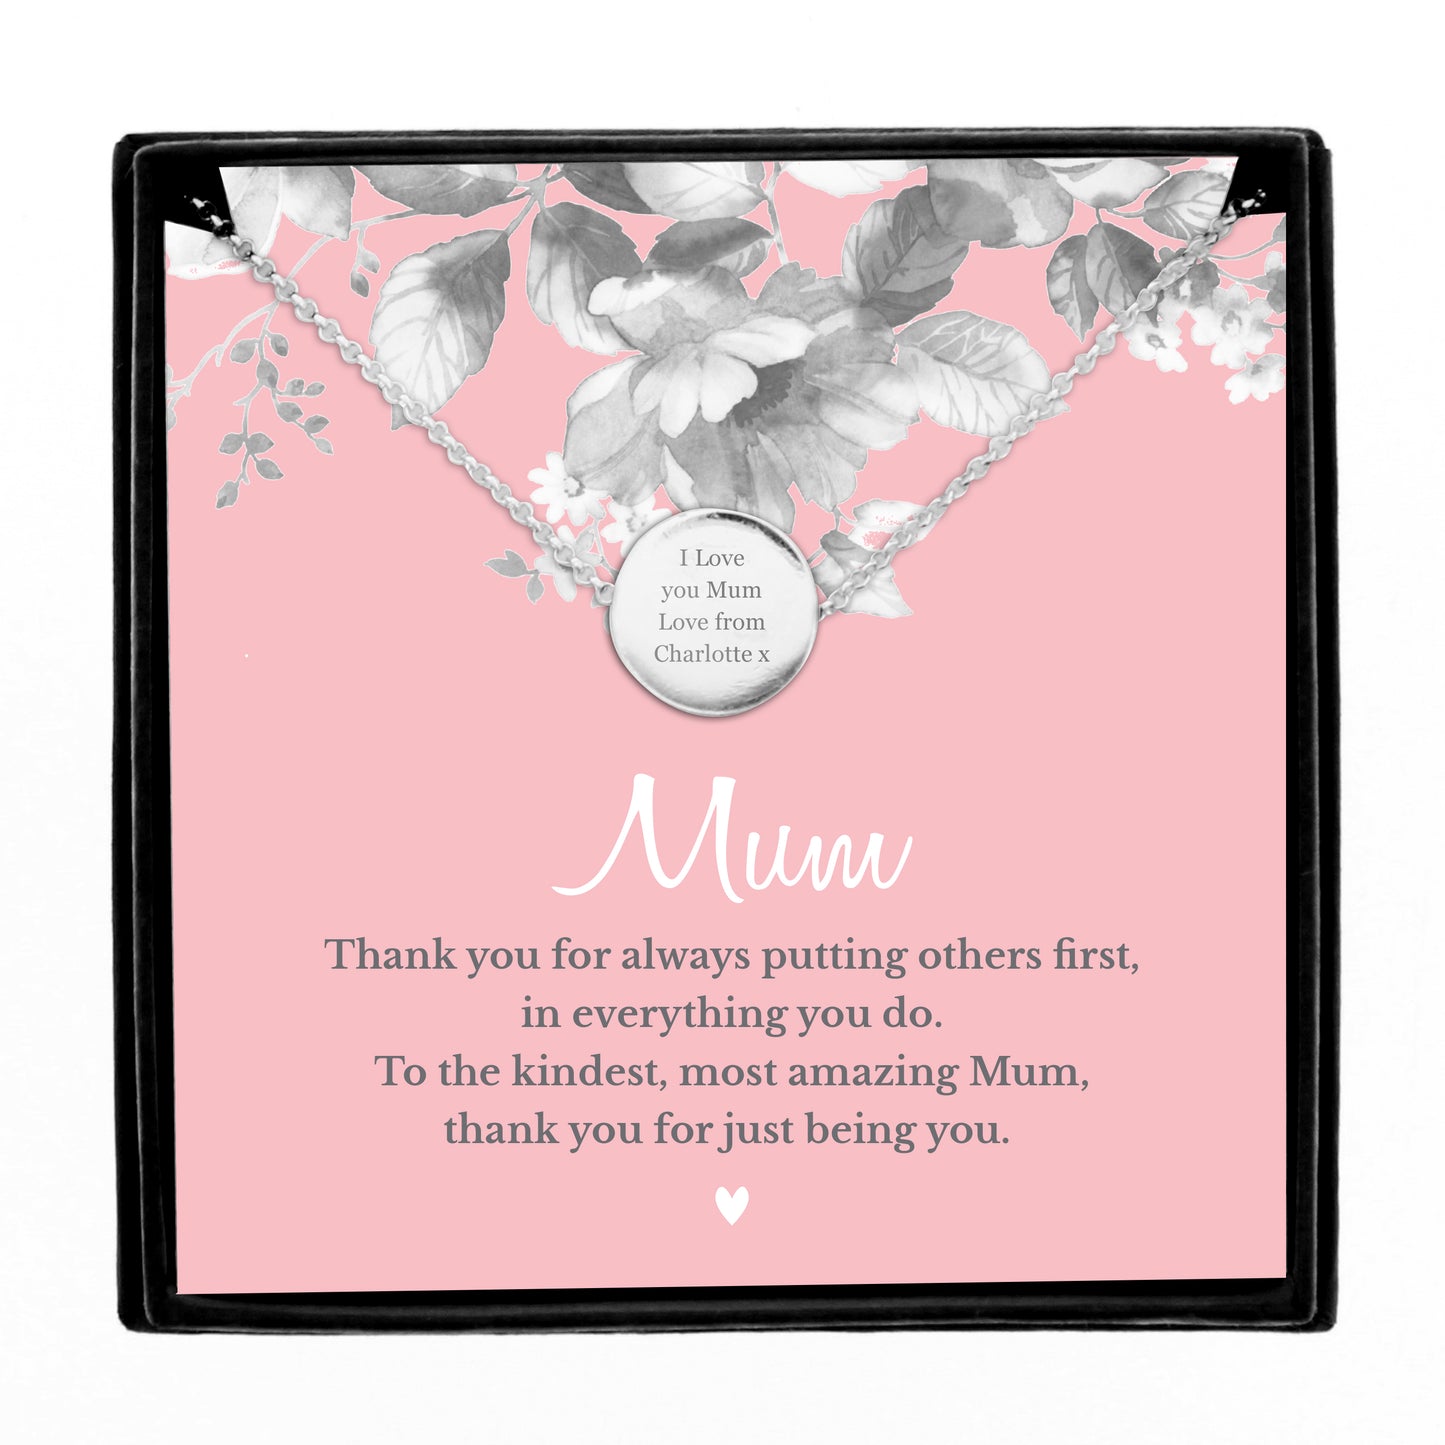 Personalised Mum Sentiment Silver Tone Necklace and Box - Personalise It!